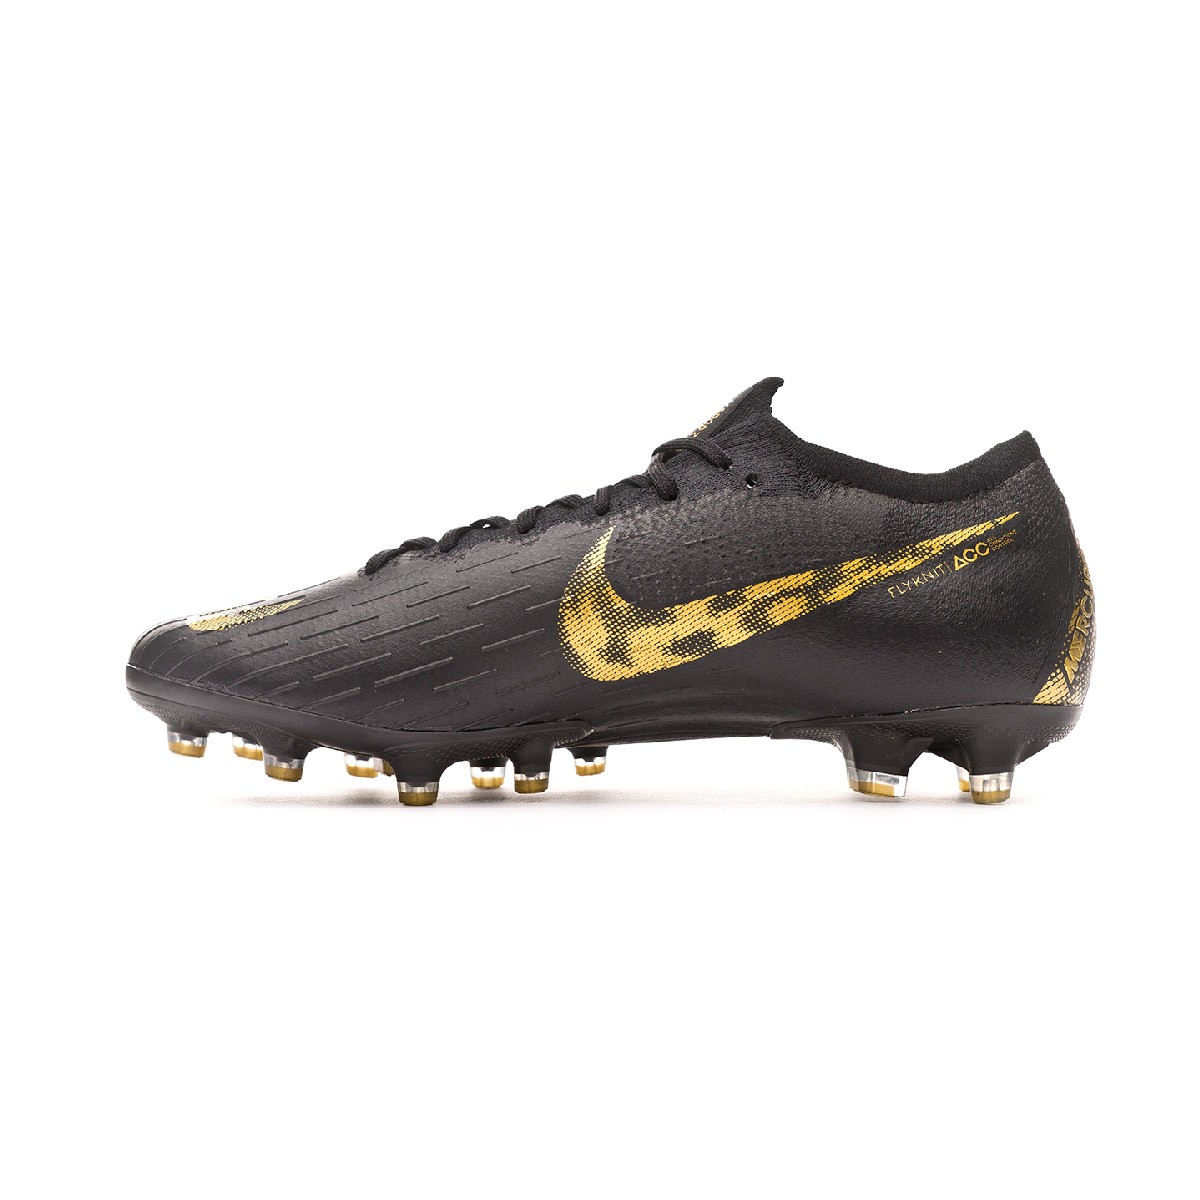 new nike football boots black and gold 